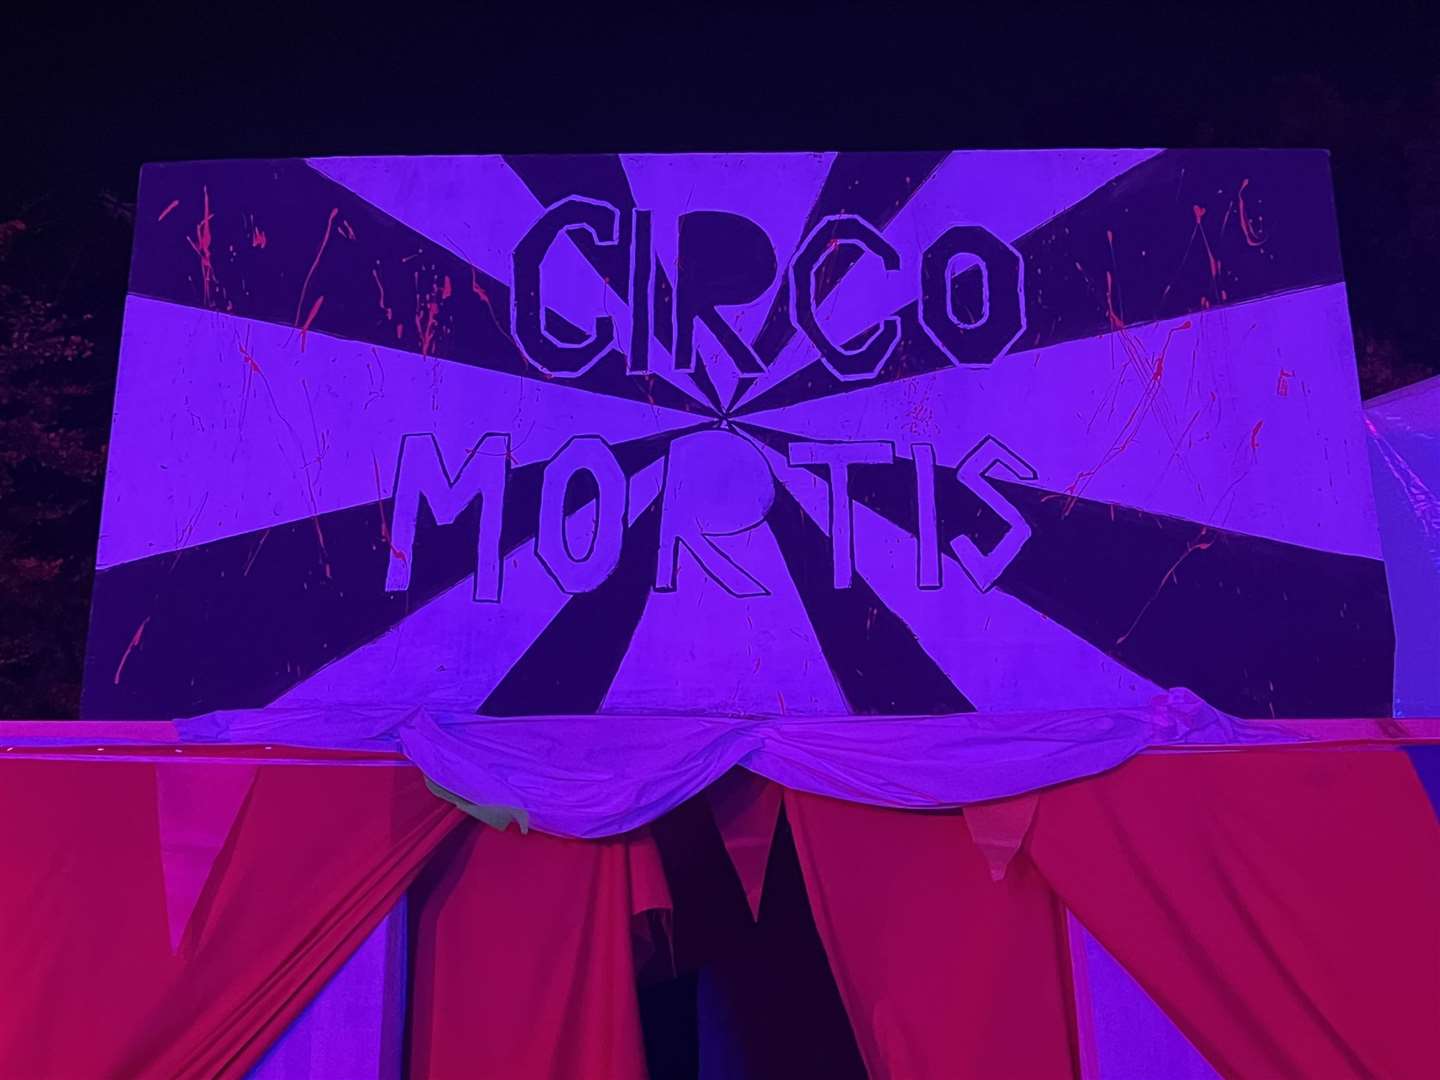 Circo Mortis at Fort Amherst. Picture: Megan Carr